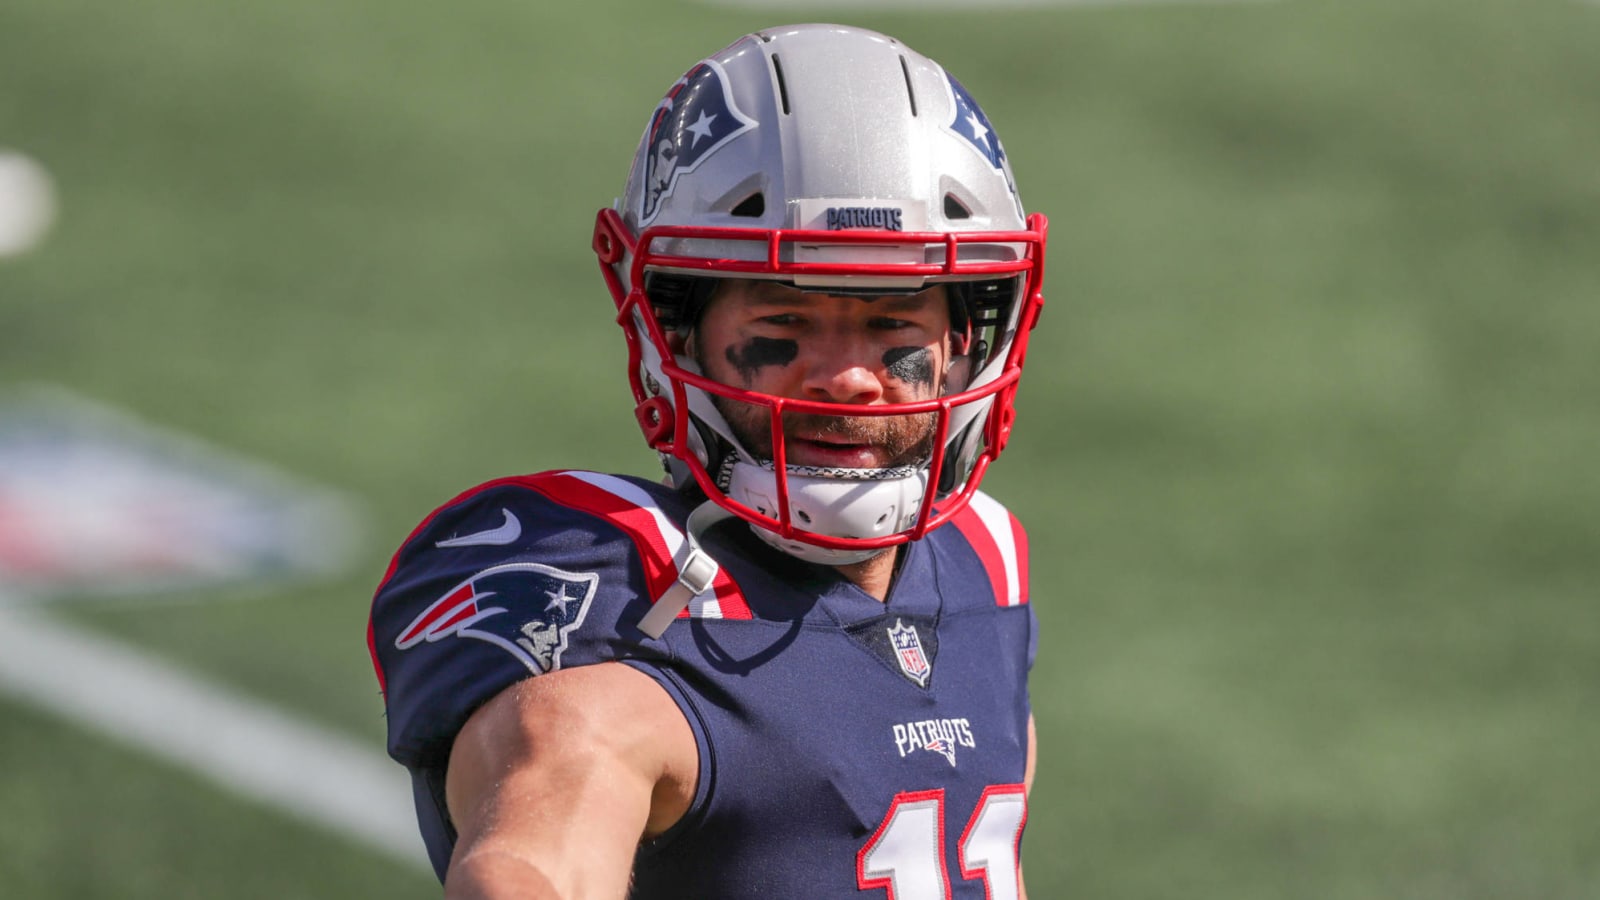 Julian Edelman plans to stay retired, nothing left to prove